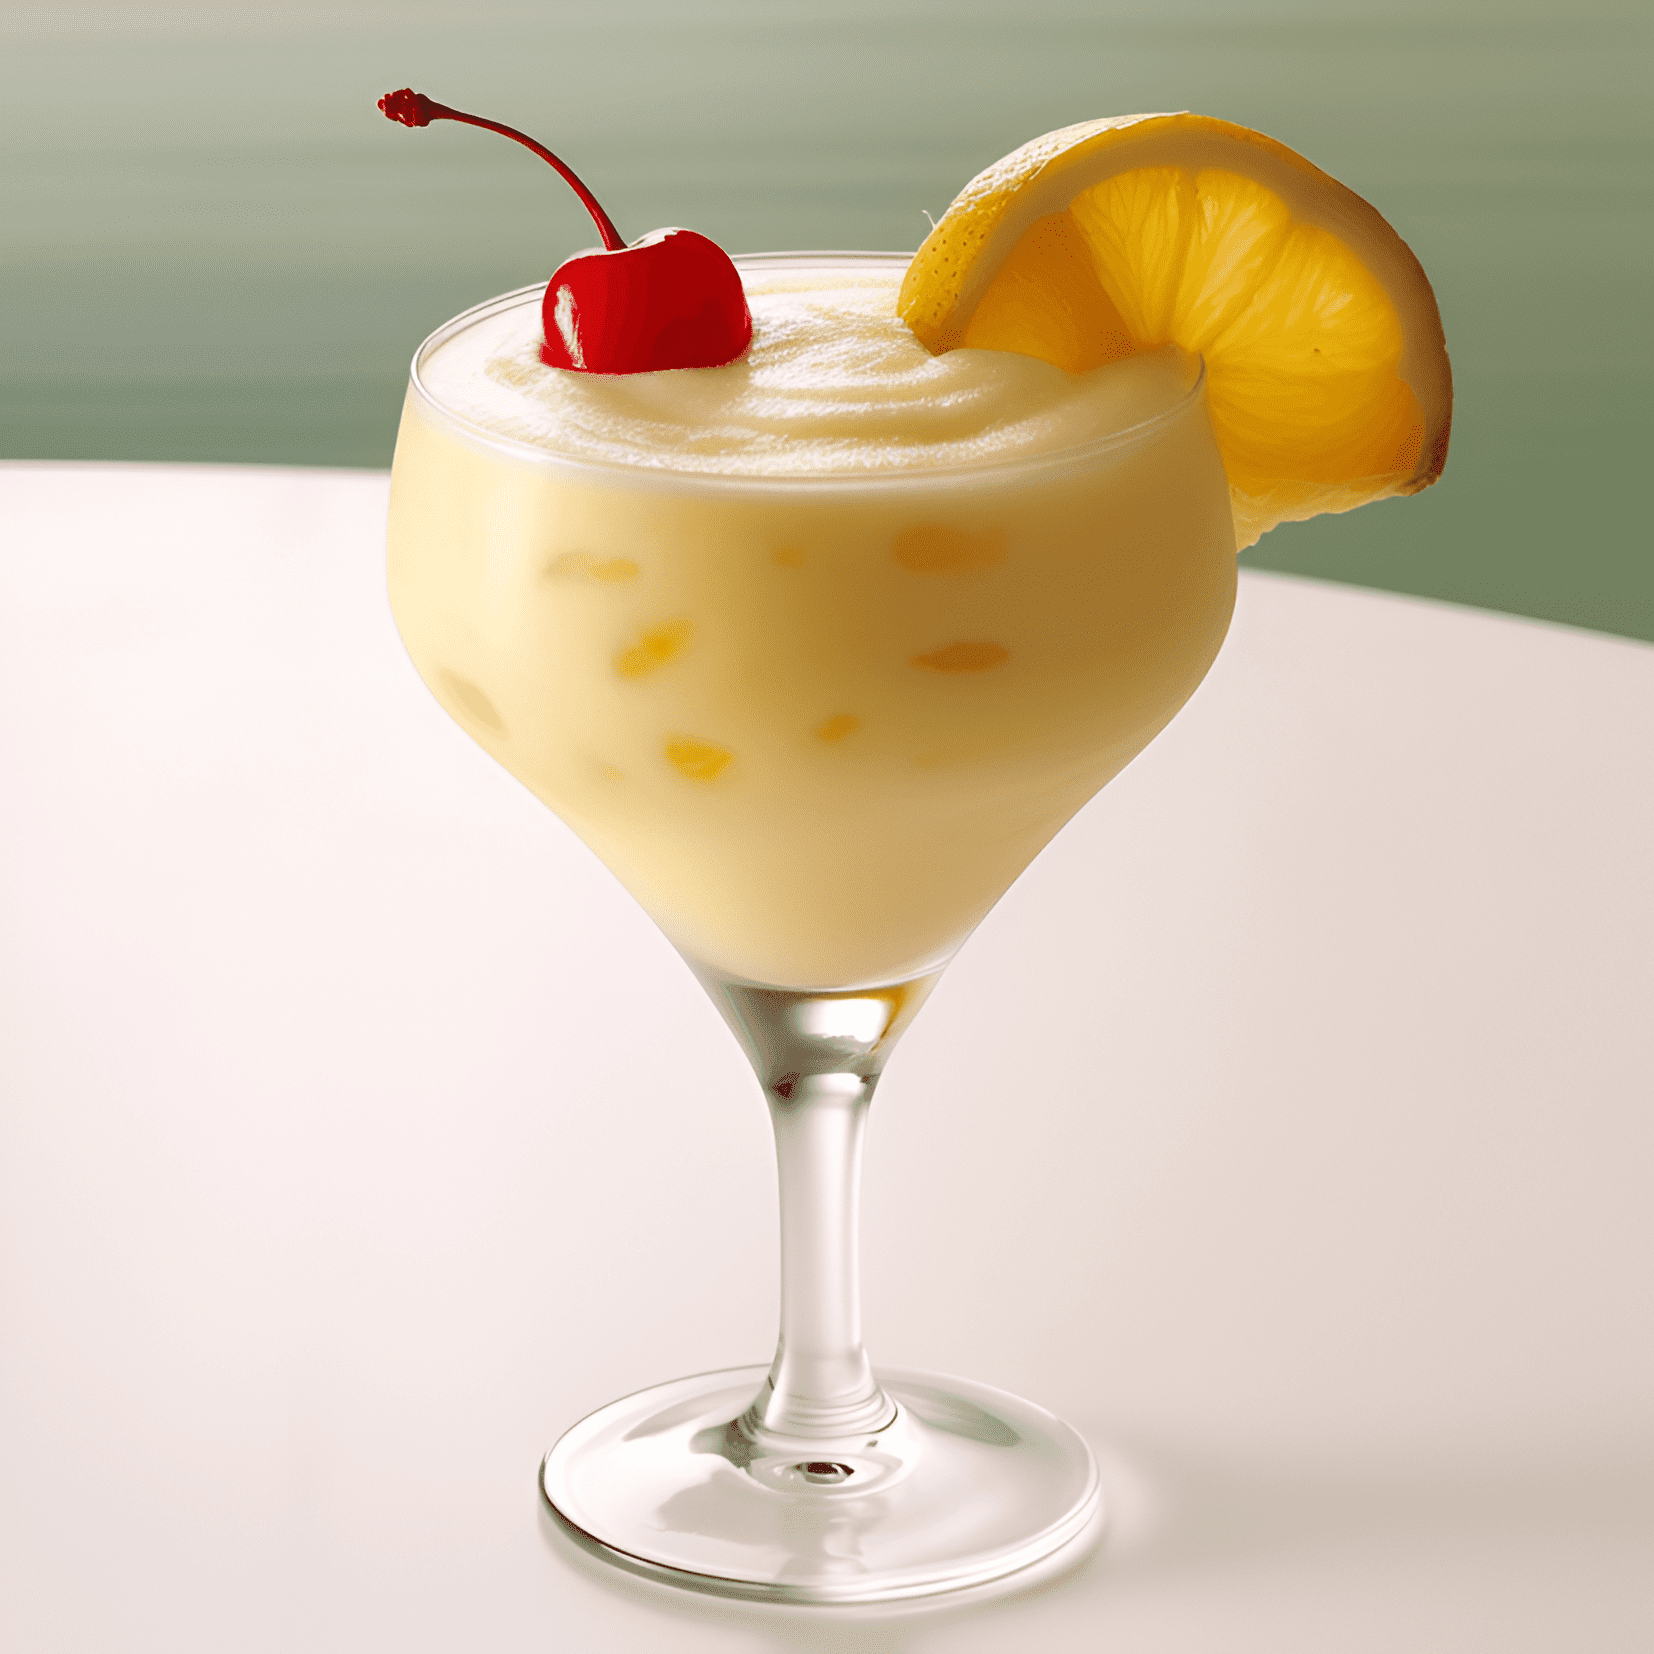 The Banana Daiquiri has a sweet, creamy, and fruity taste with a hint of tartness from the lime juice. It's a well-balanced cocktail that combines the tropical flavors of banana and rum with the refreshing citrus notes of lime.